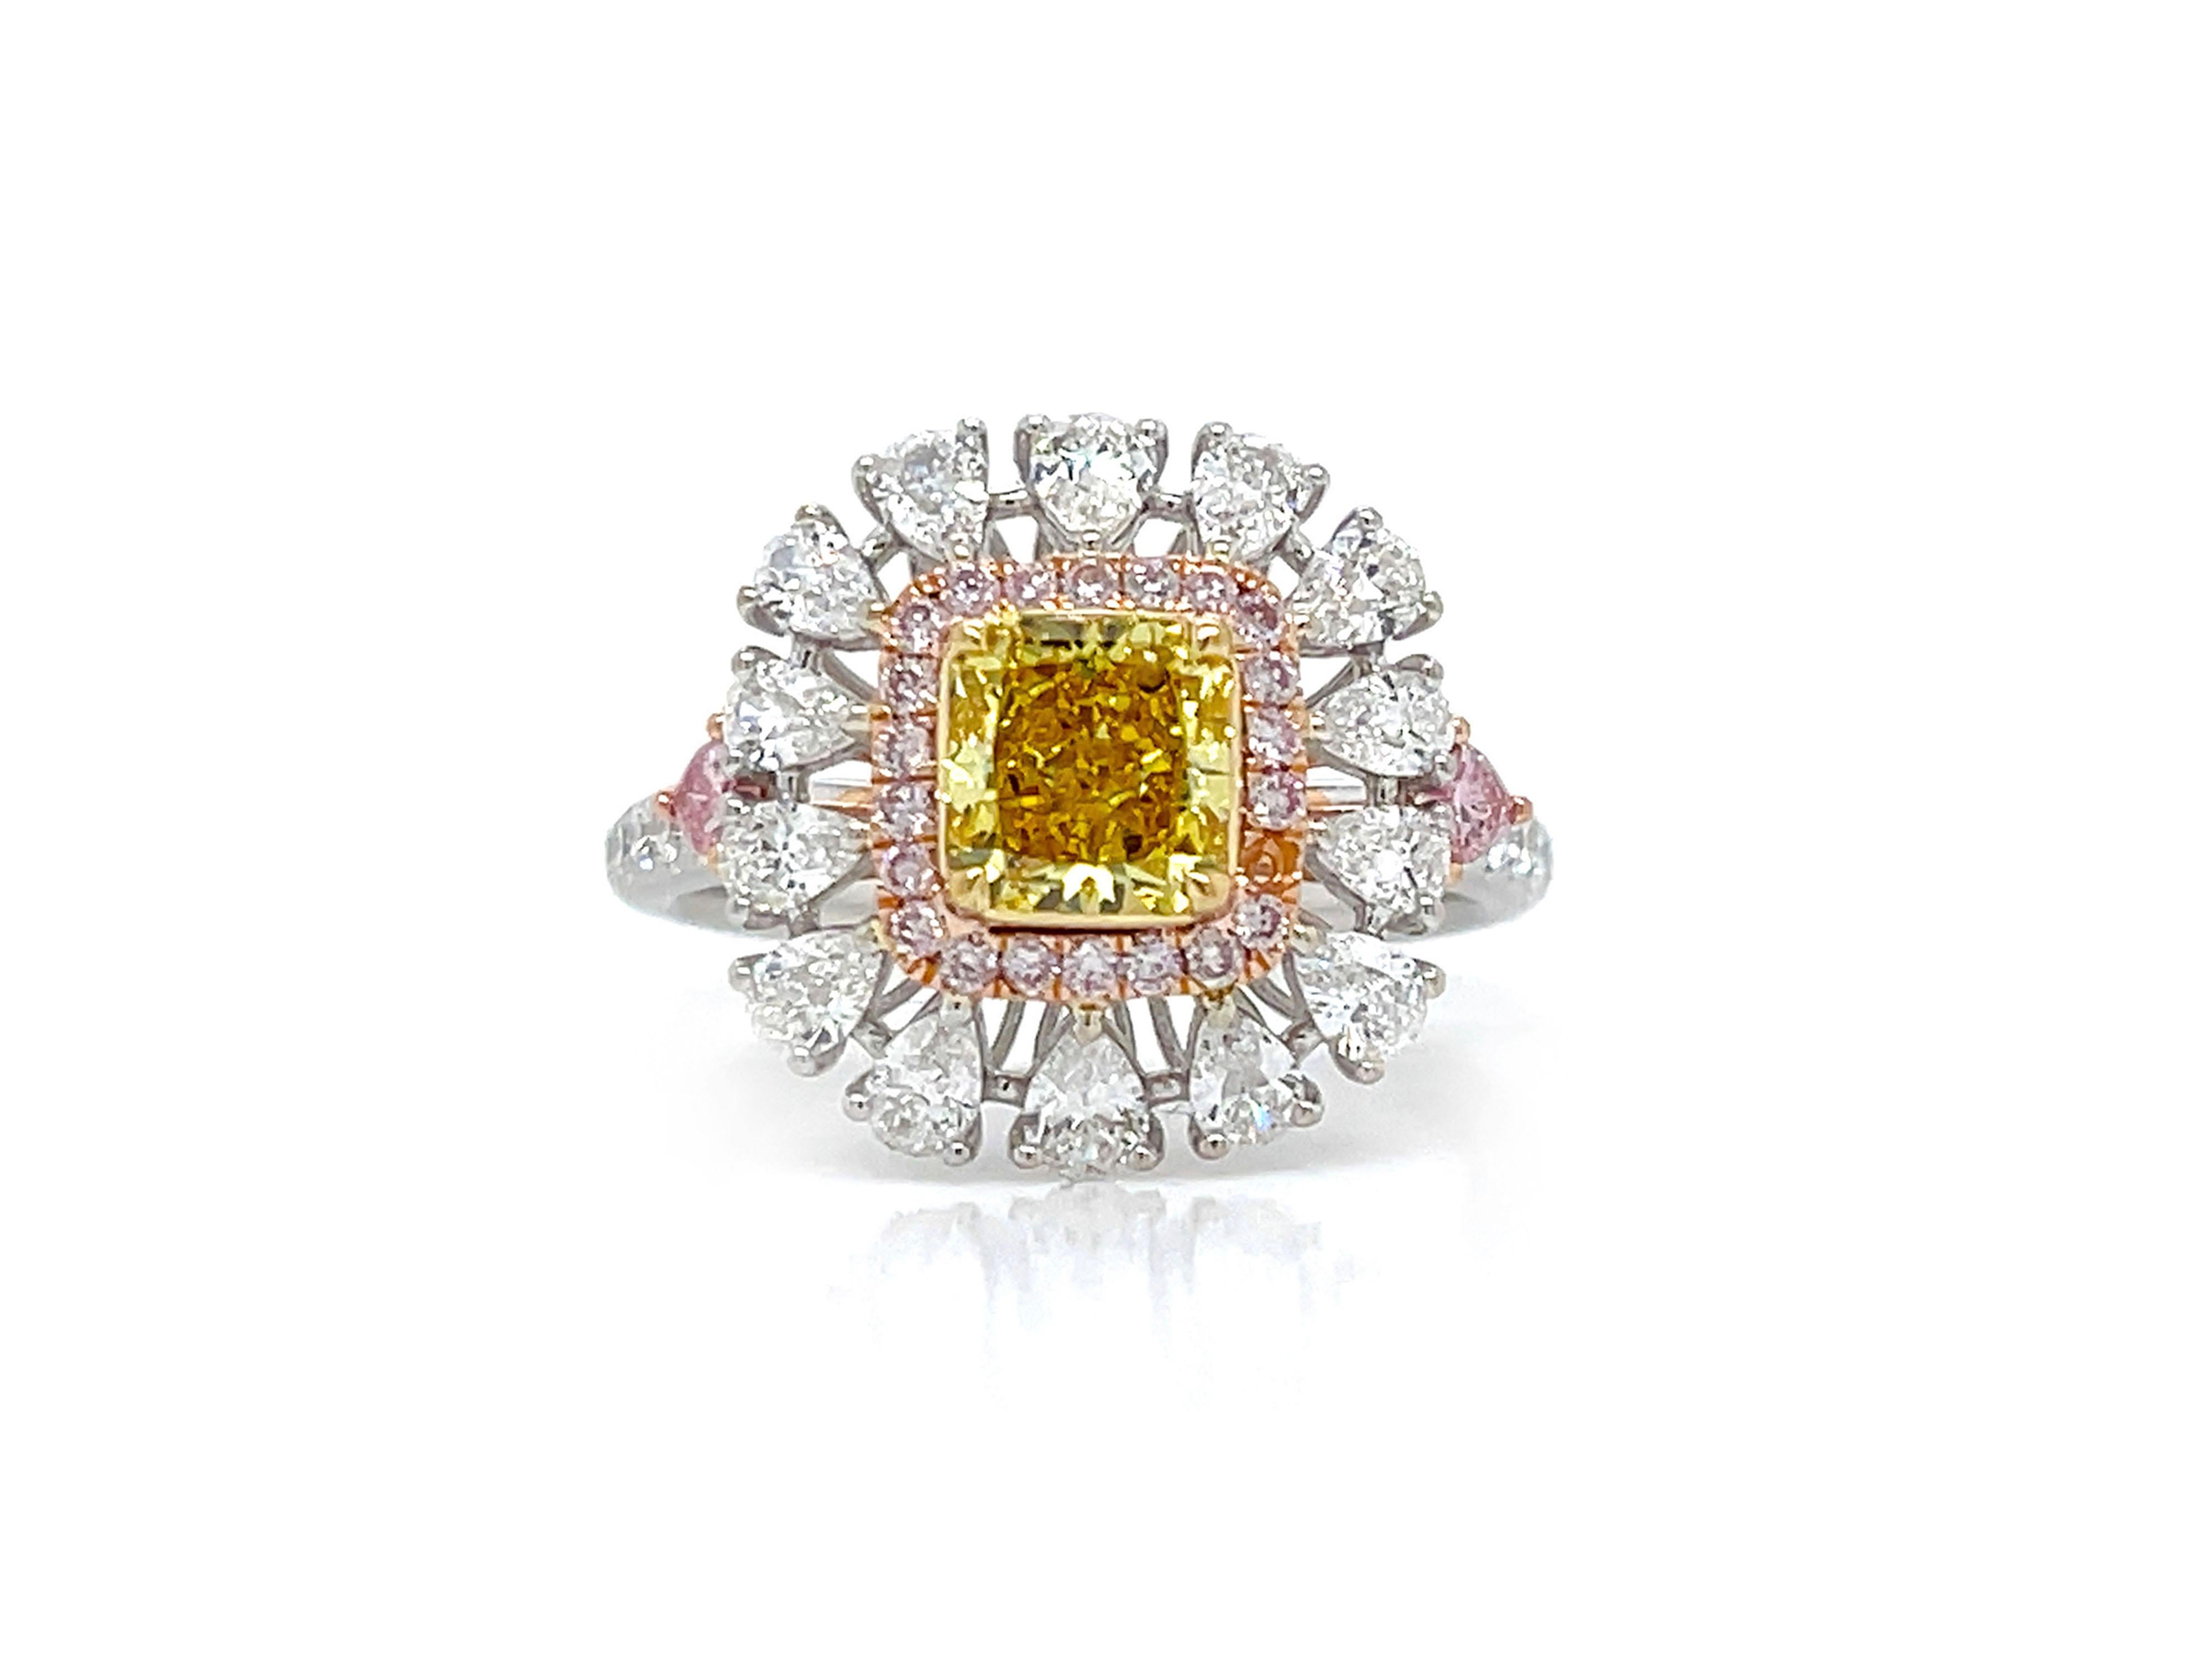 A gorgeous Engagement Cocktail ring Showcasing 1.02 Carat radiant cut Fancy Vivid Yellow Diamond, GIA Certified as VS2 clarity. with colorful accents of 0.12 carat Fancy Pink heart shaped cut on the sides offer a vibrant take. Surrounding the center